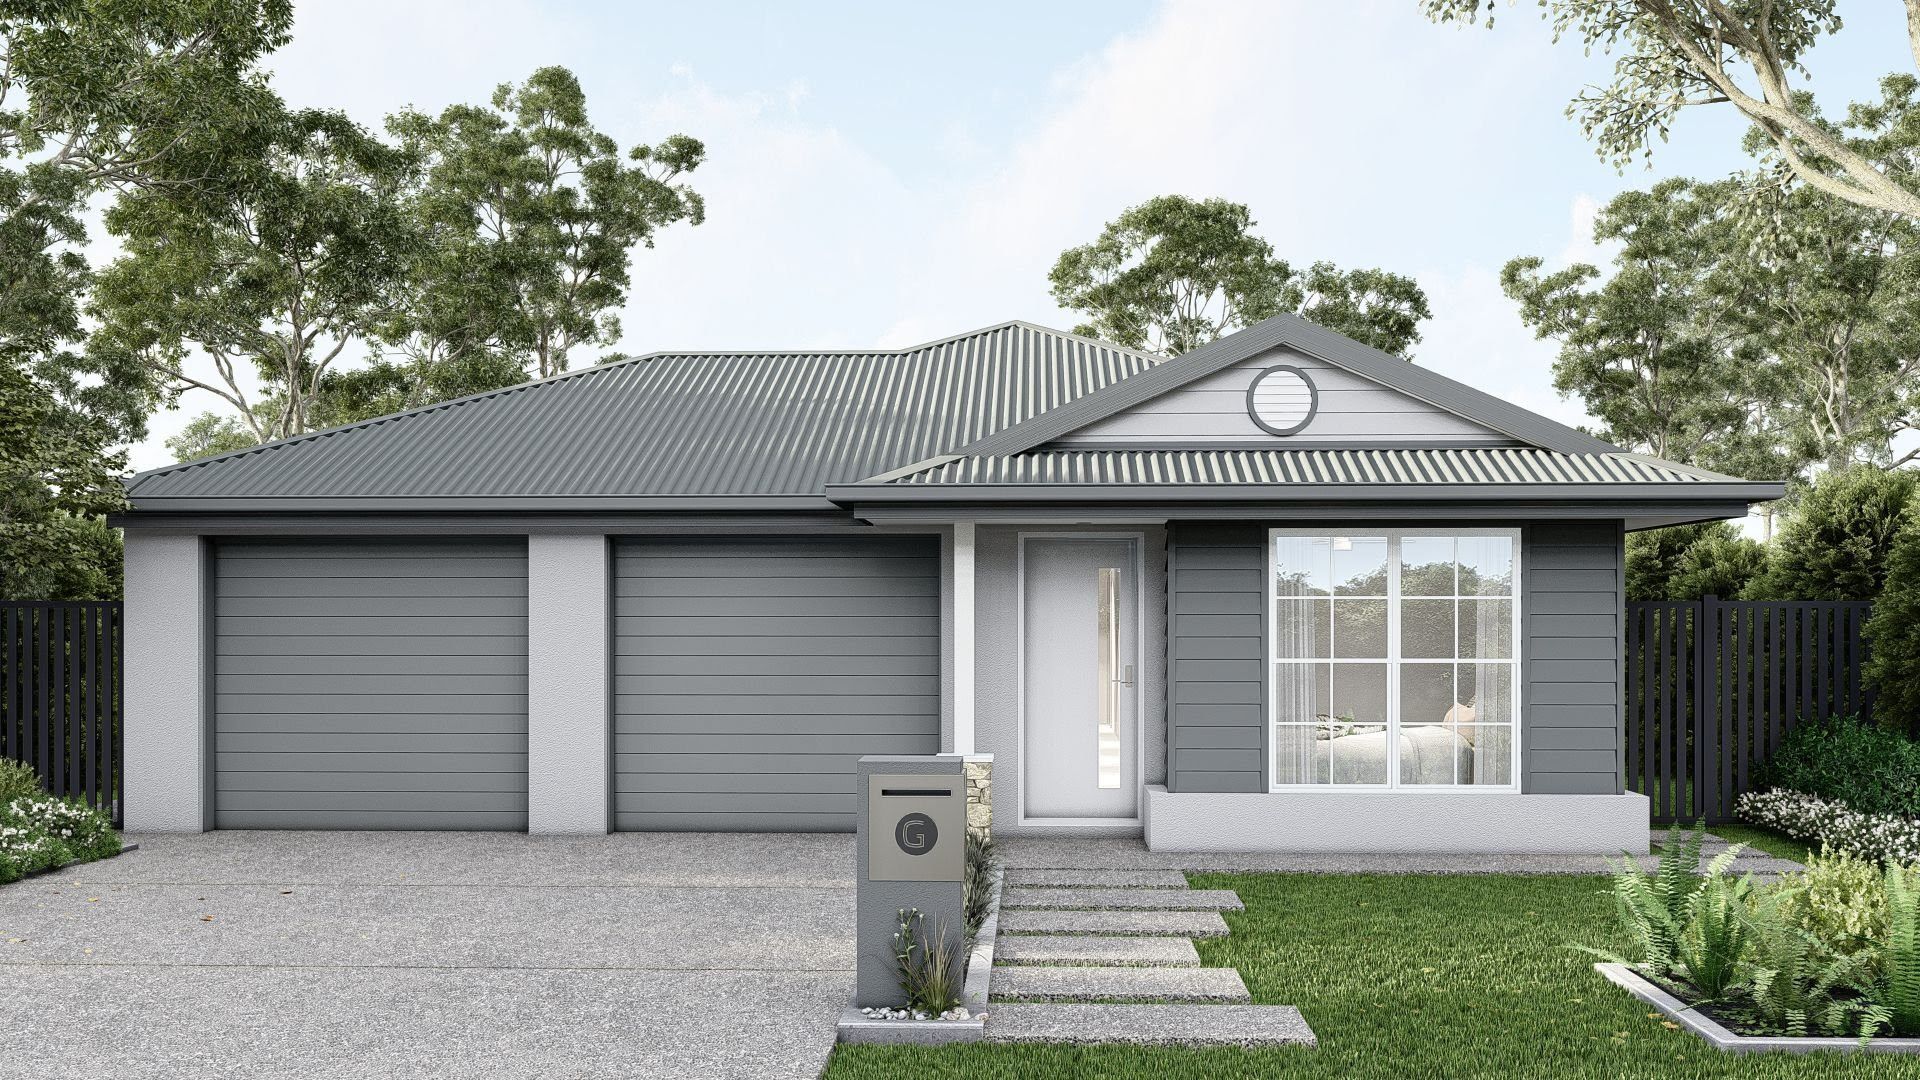 5 bedrooms New House & Land in  CABOOLTURE QLD, 4510